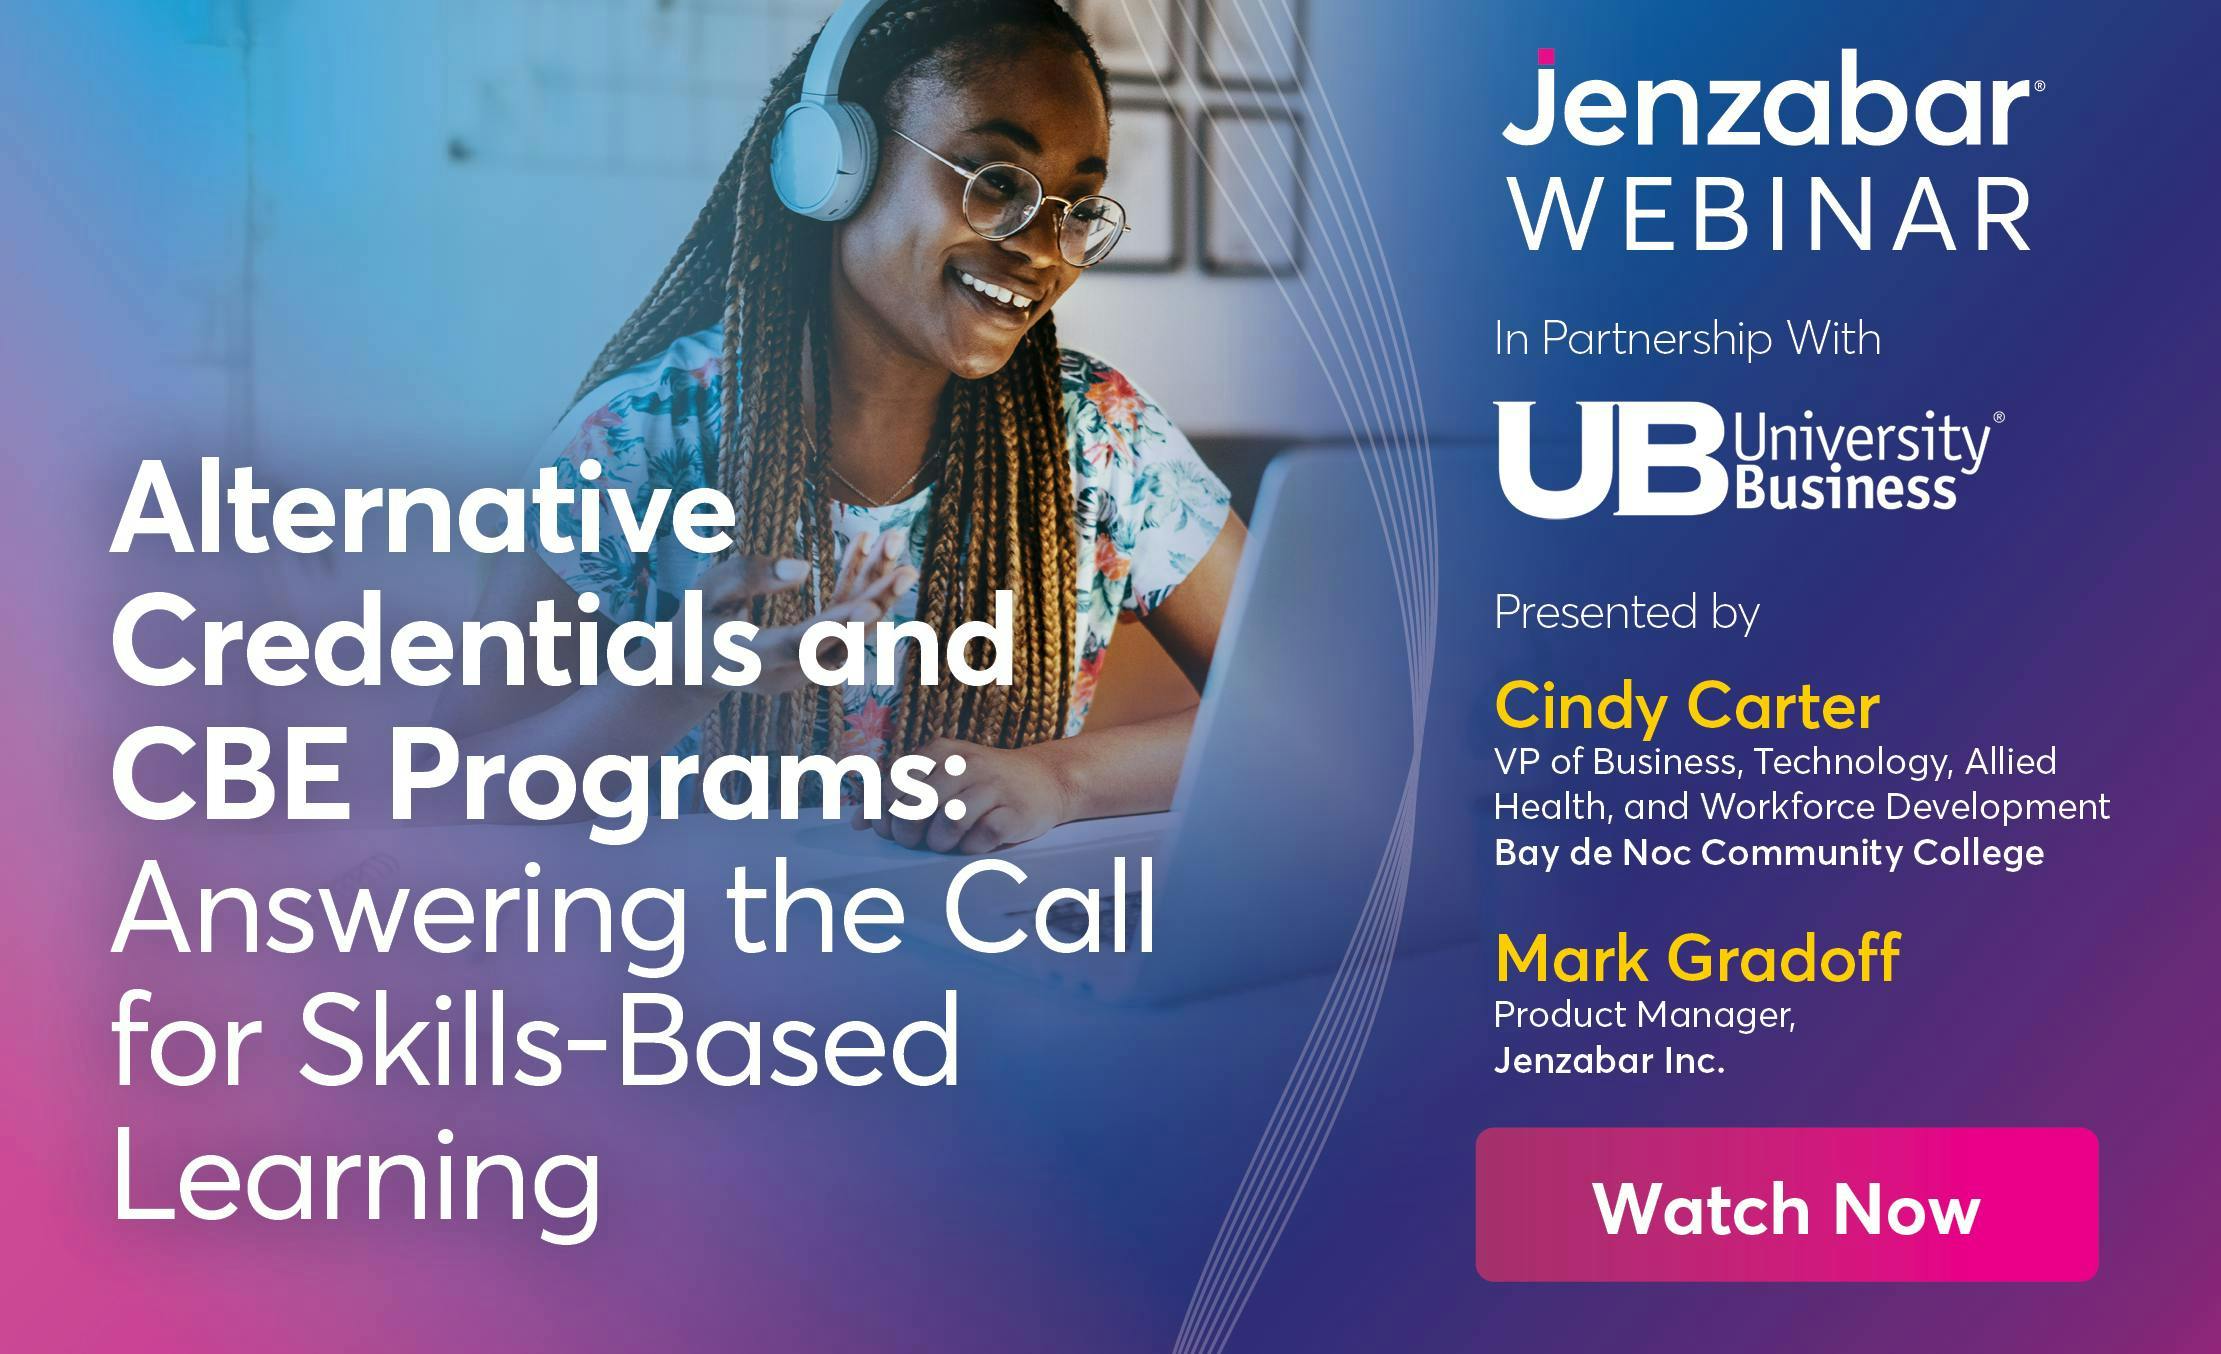 Webinar: Alternative Credentials and CBE Programs: Answering the Call for Skills-Based Learning